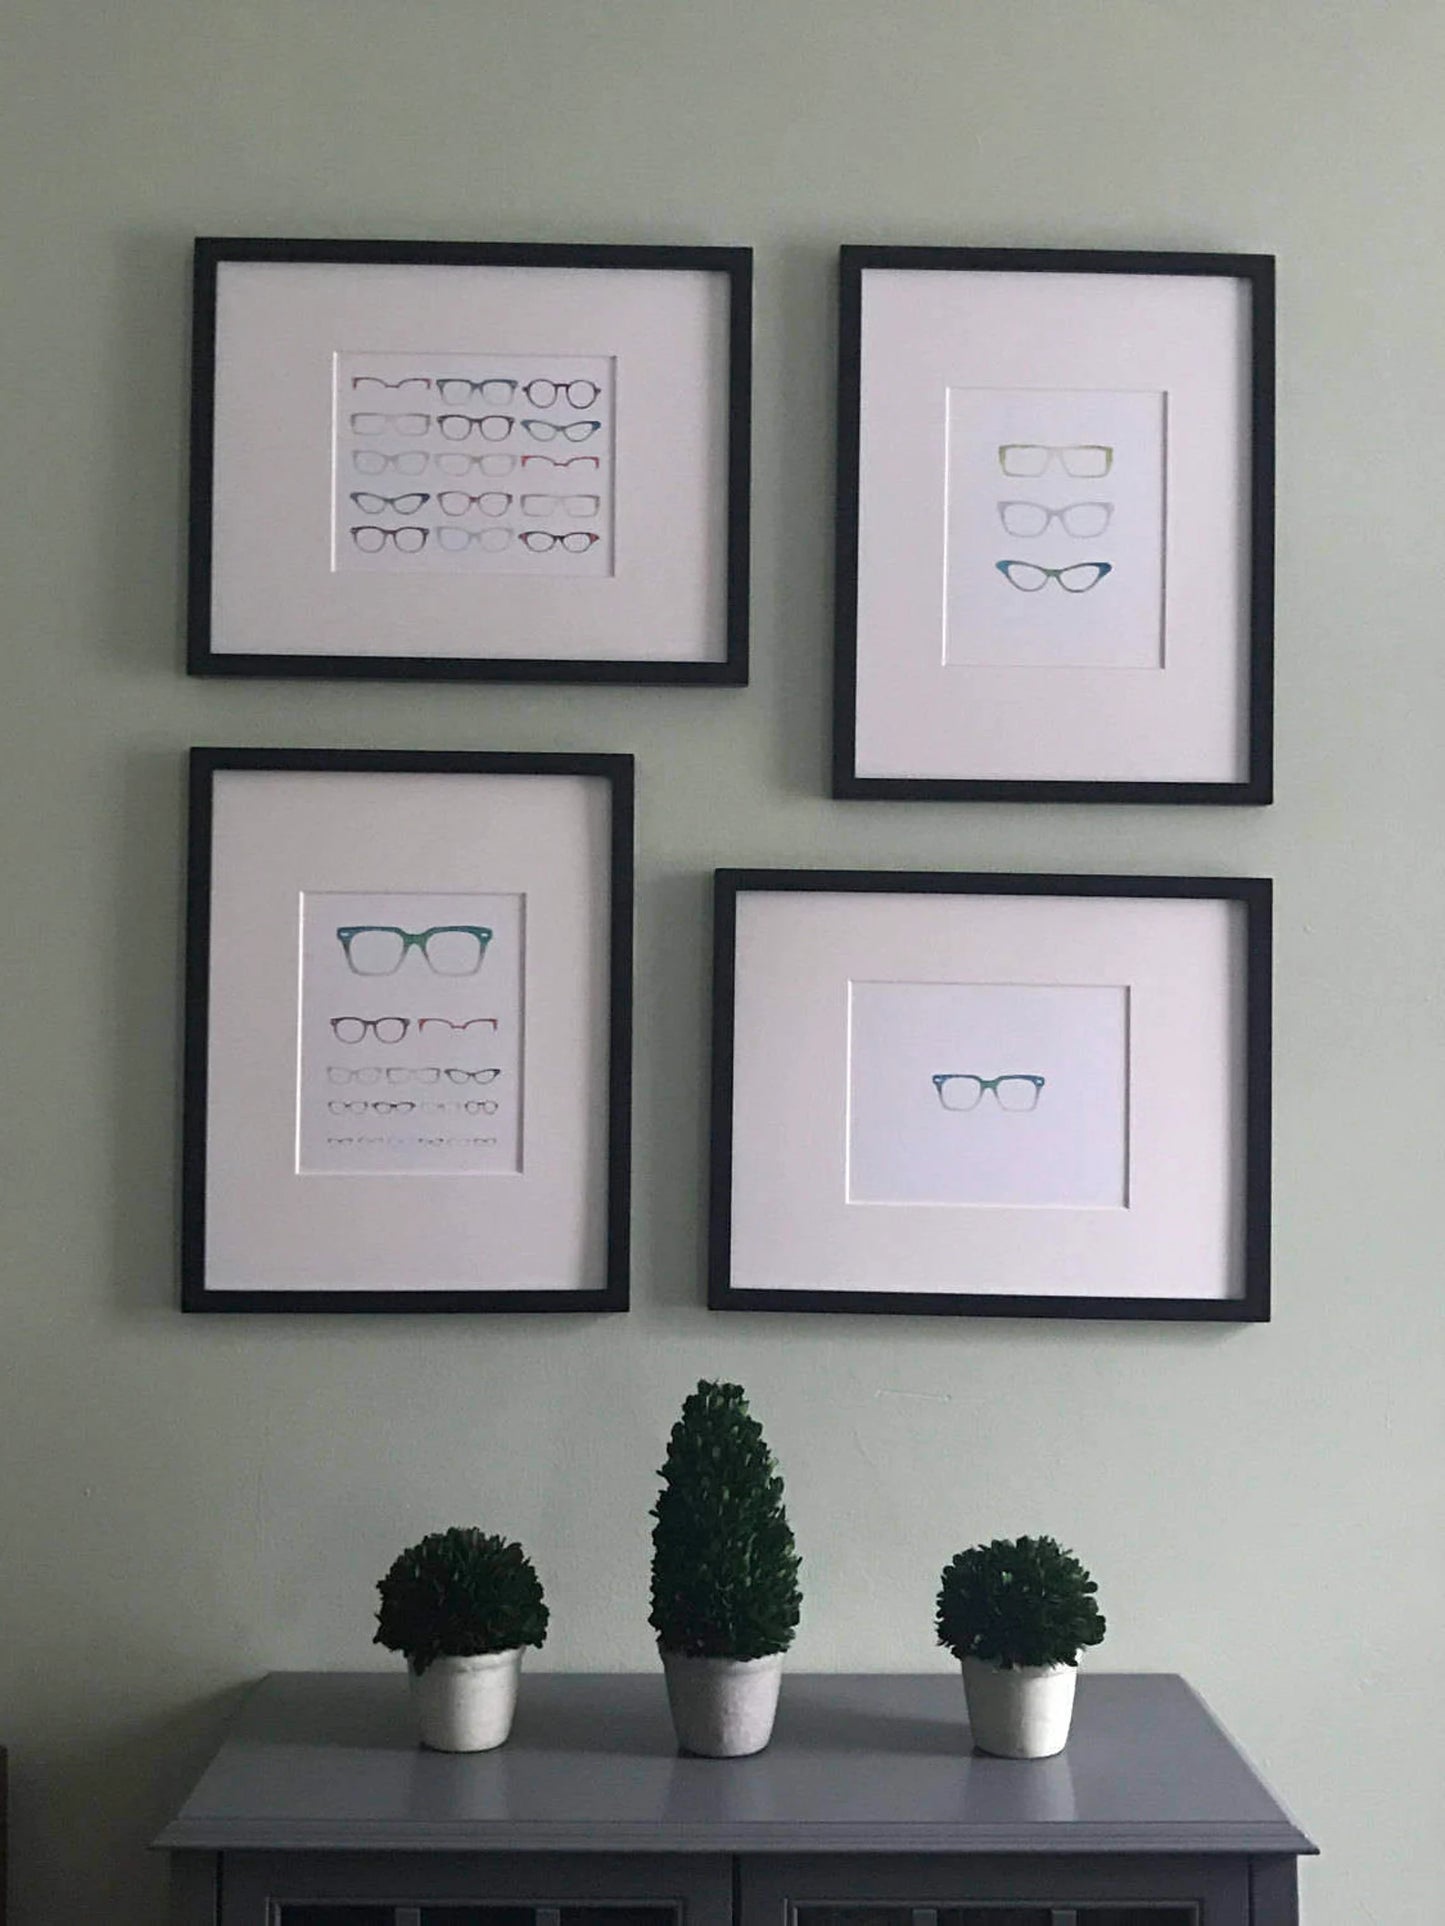 A print of an eye chart made up of varying sizes and styles of glasses. Shown displayed on a wall with other prints.